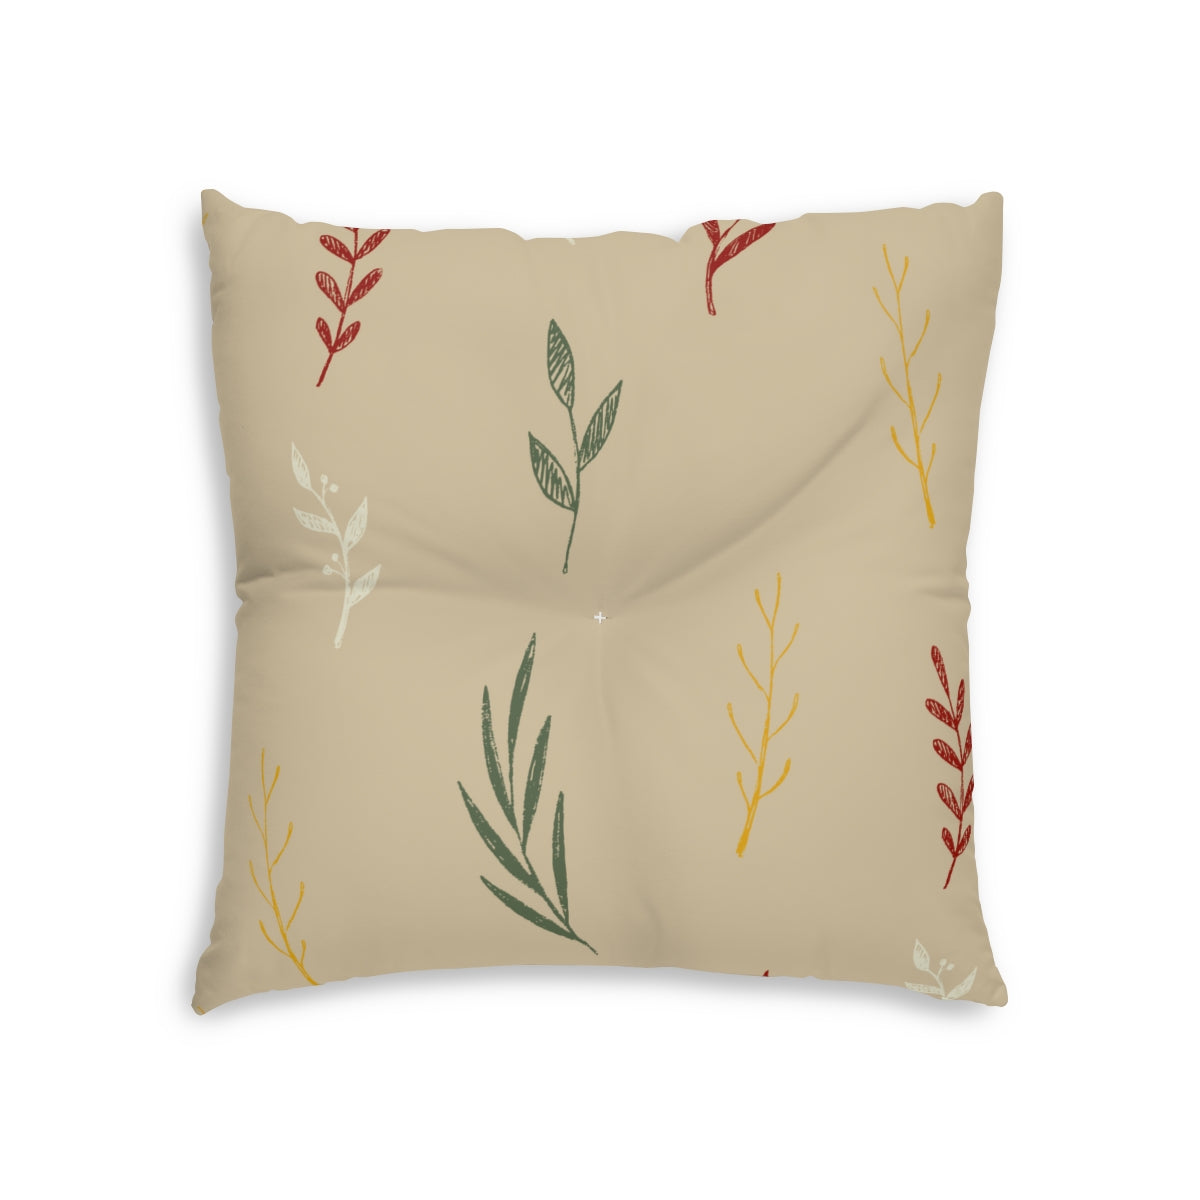 Lifestyle Details - Beige Square Tufted Holiday Floor Pillow - Colorful Garland - 26x26 - Front View